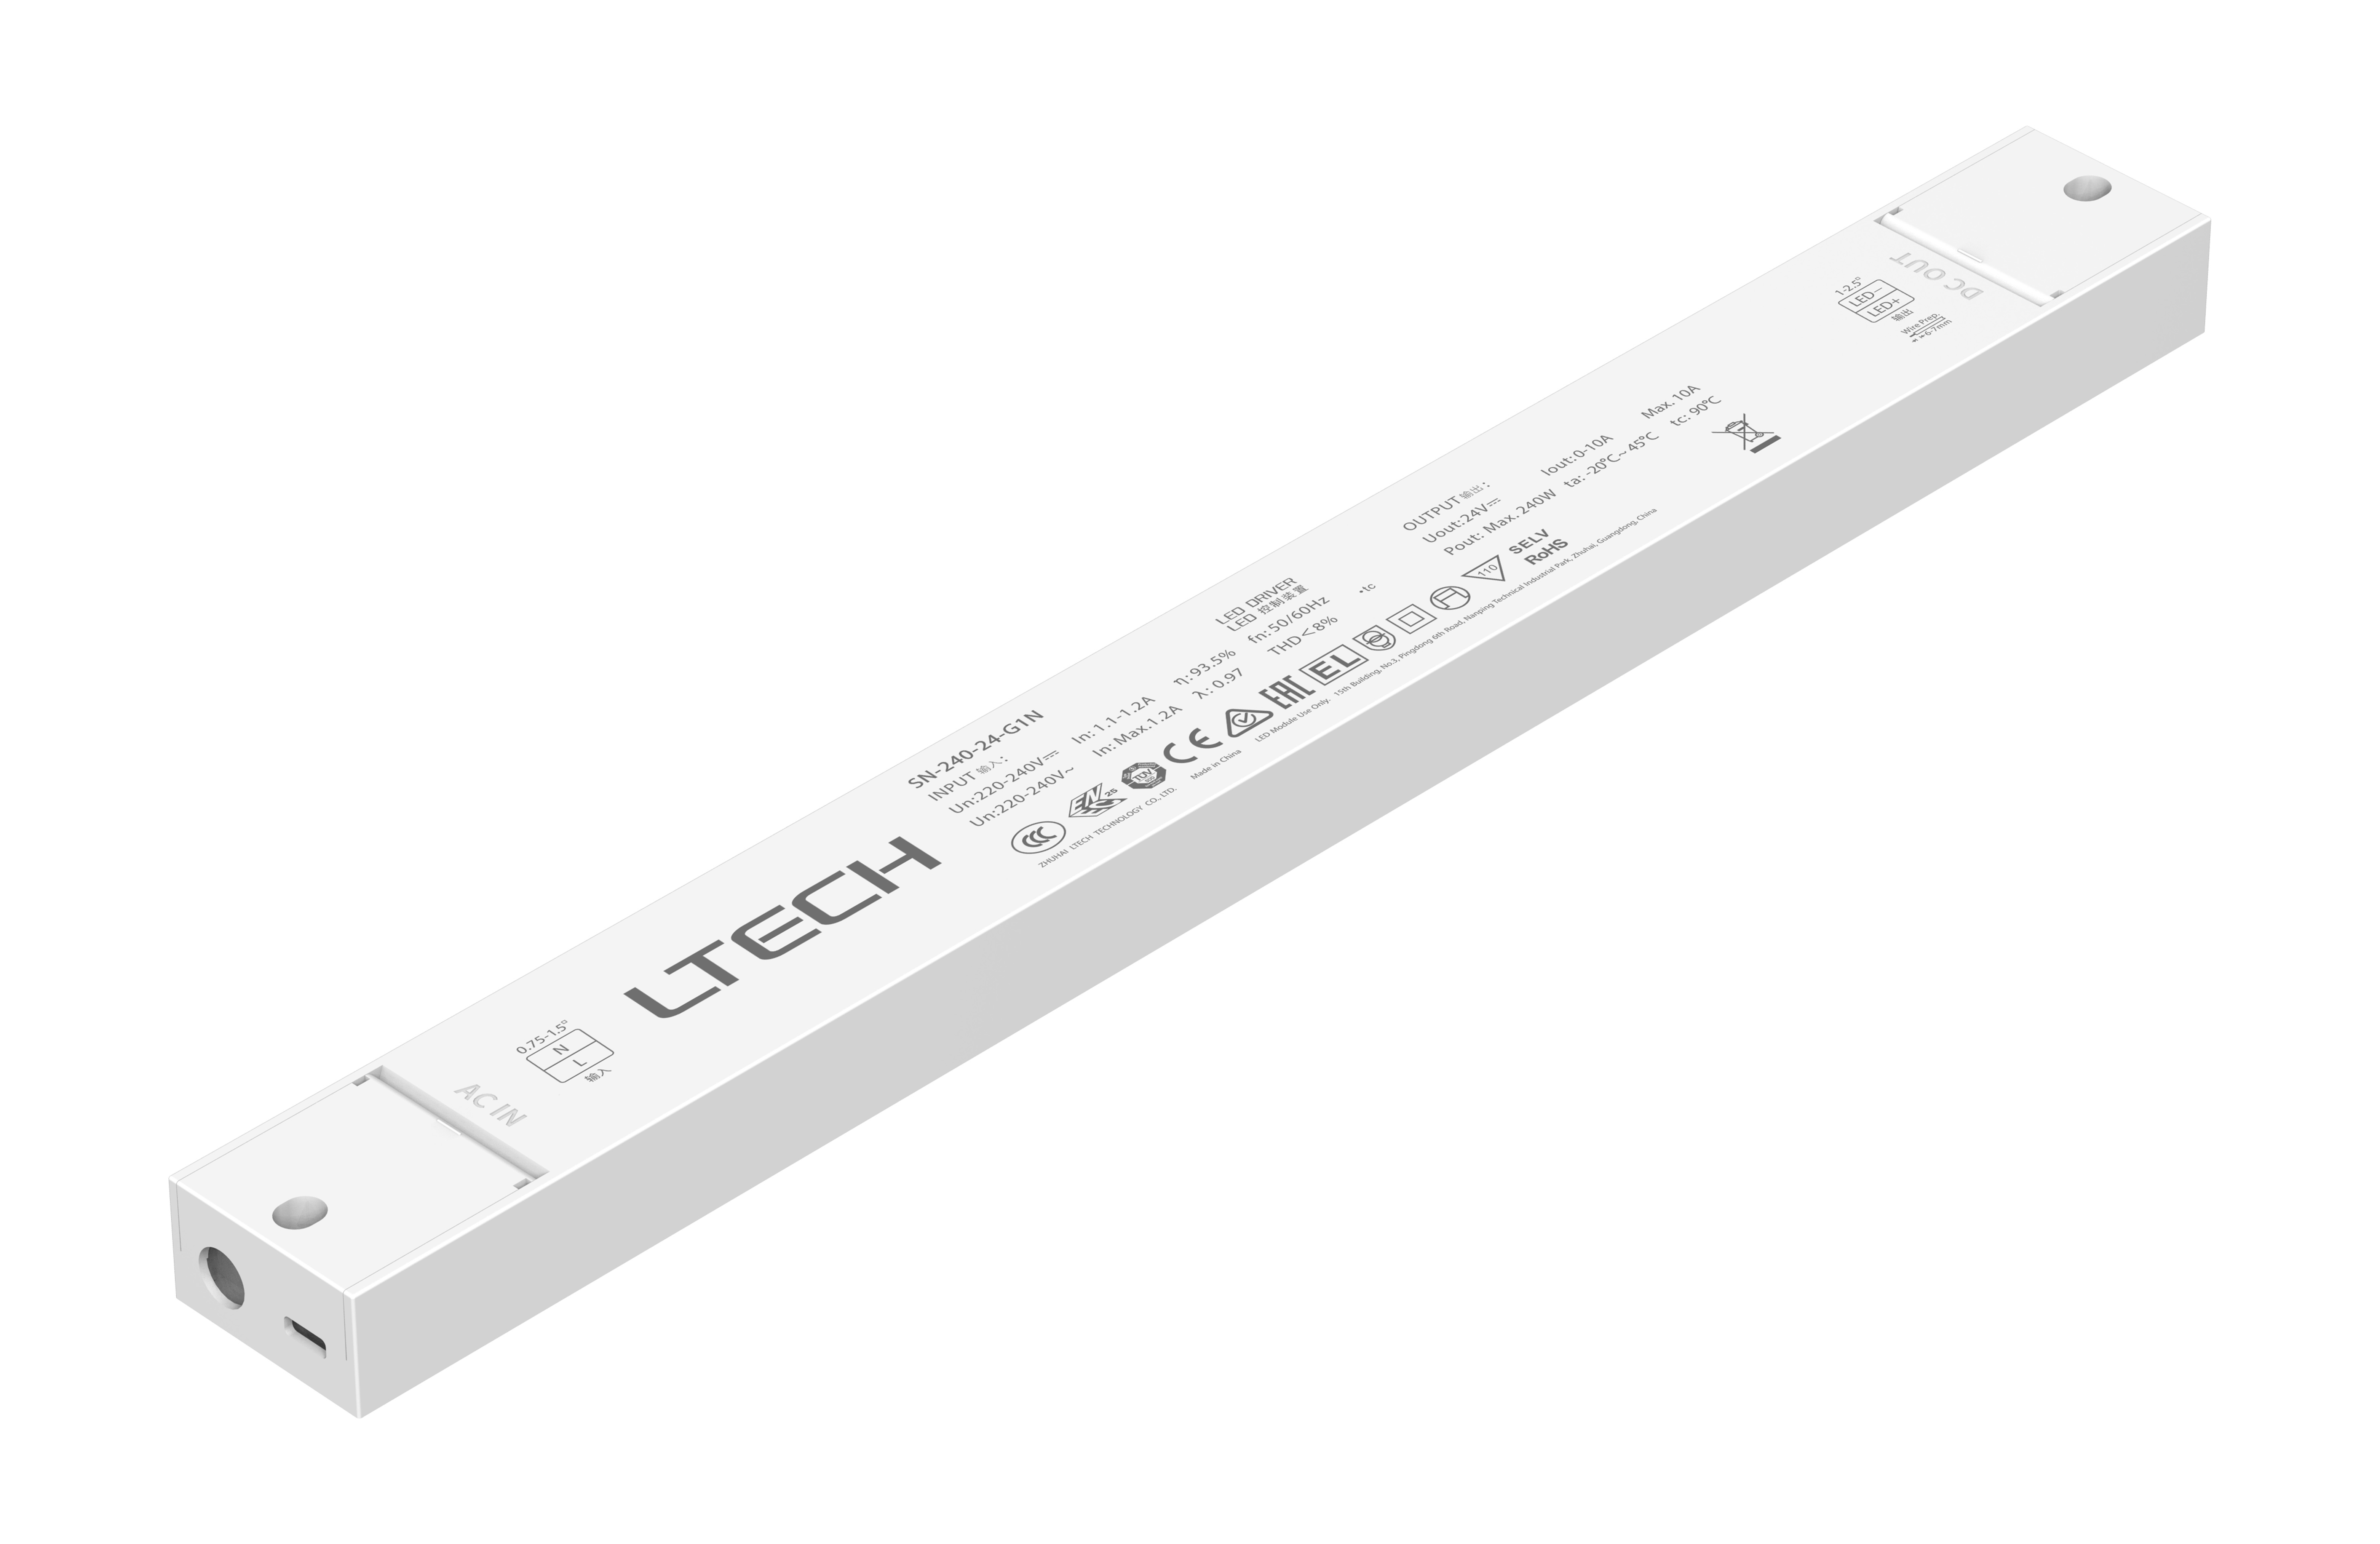 SN-240-24-G1N  Intelligent Constant Voltage  LED Driver, ON/OFF, 240W, 24VDC 10A , 220-240Vac, IP20, 5yrs Warrenty.